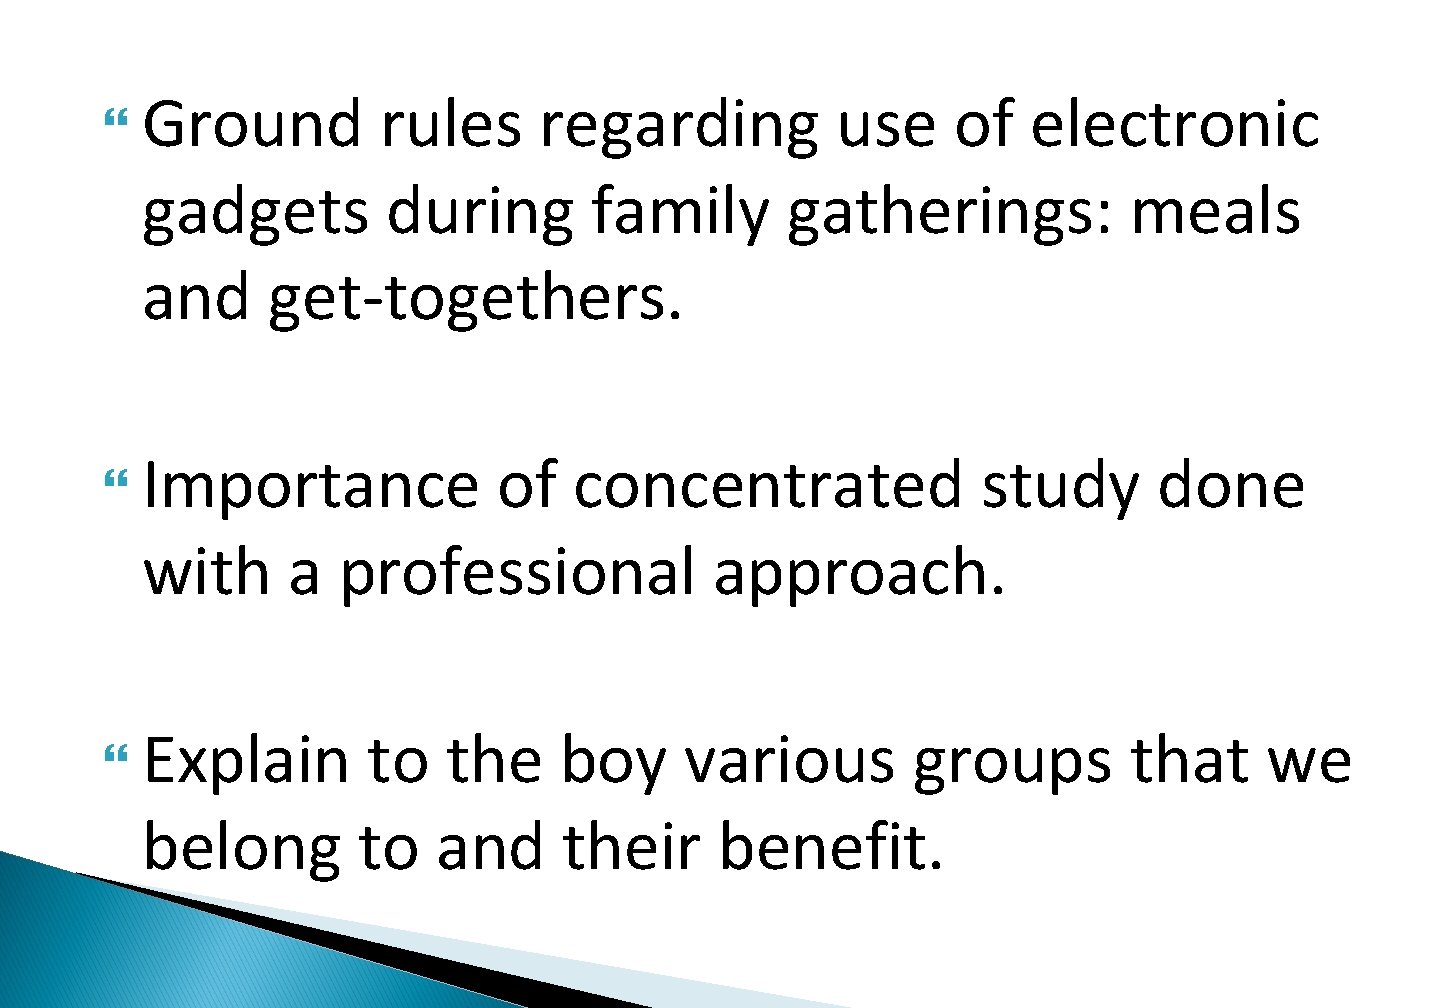  Ground rules regarding use of electronic gadgets during family gatherings: meals and get-togethers.